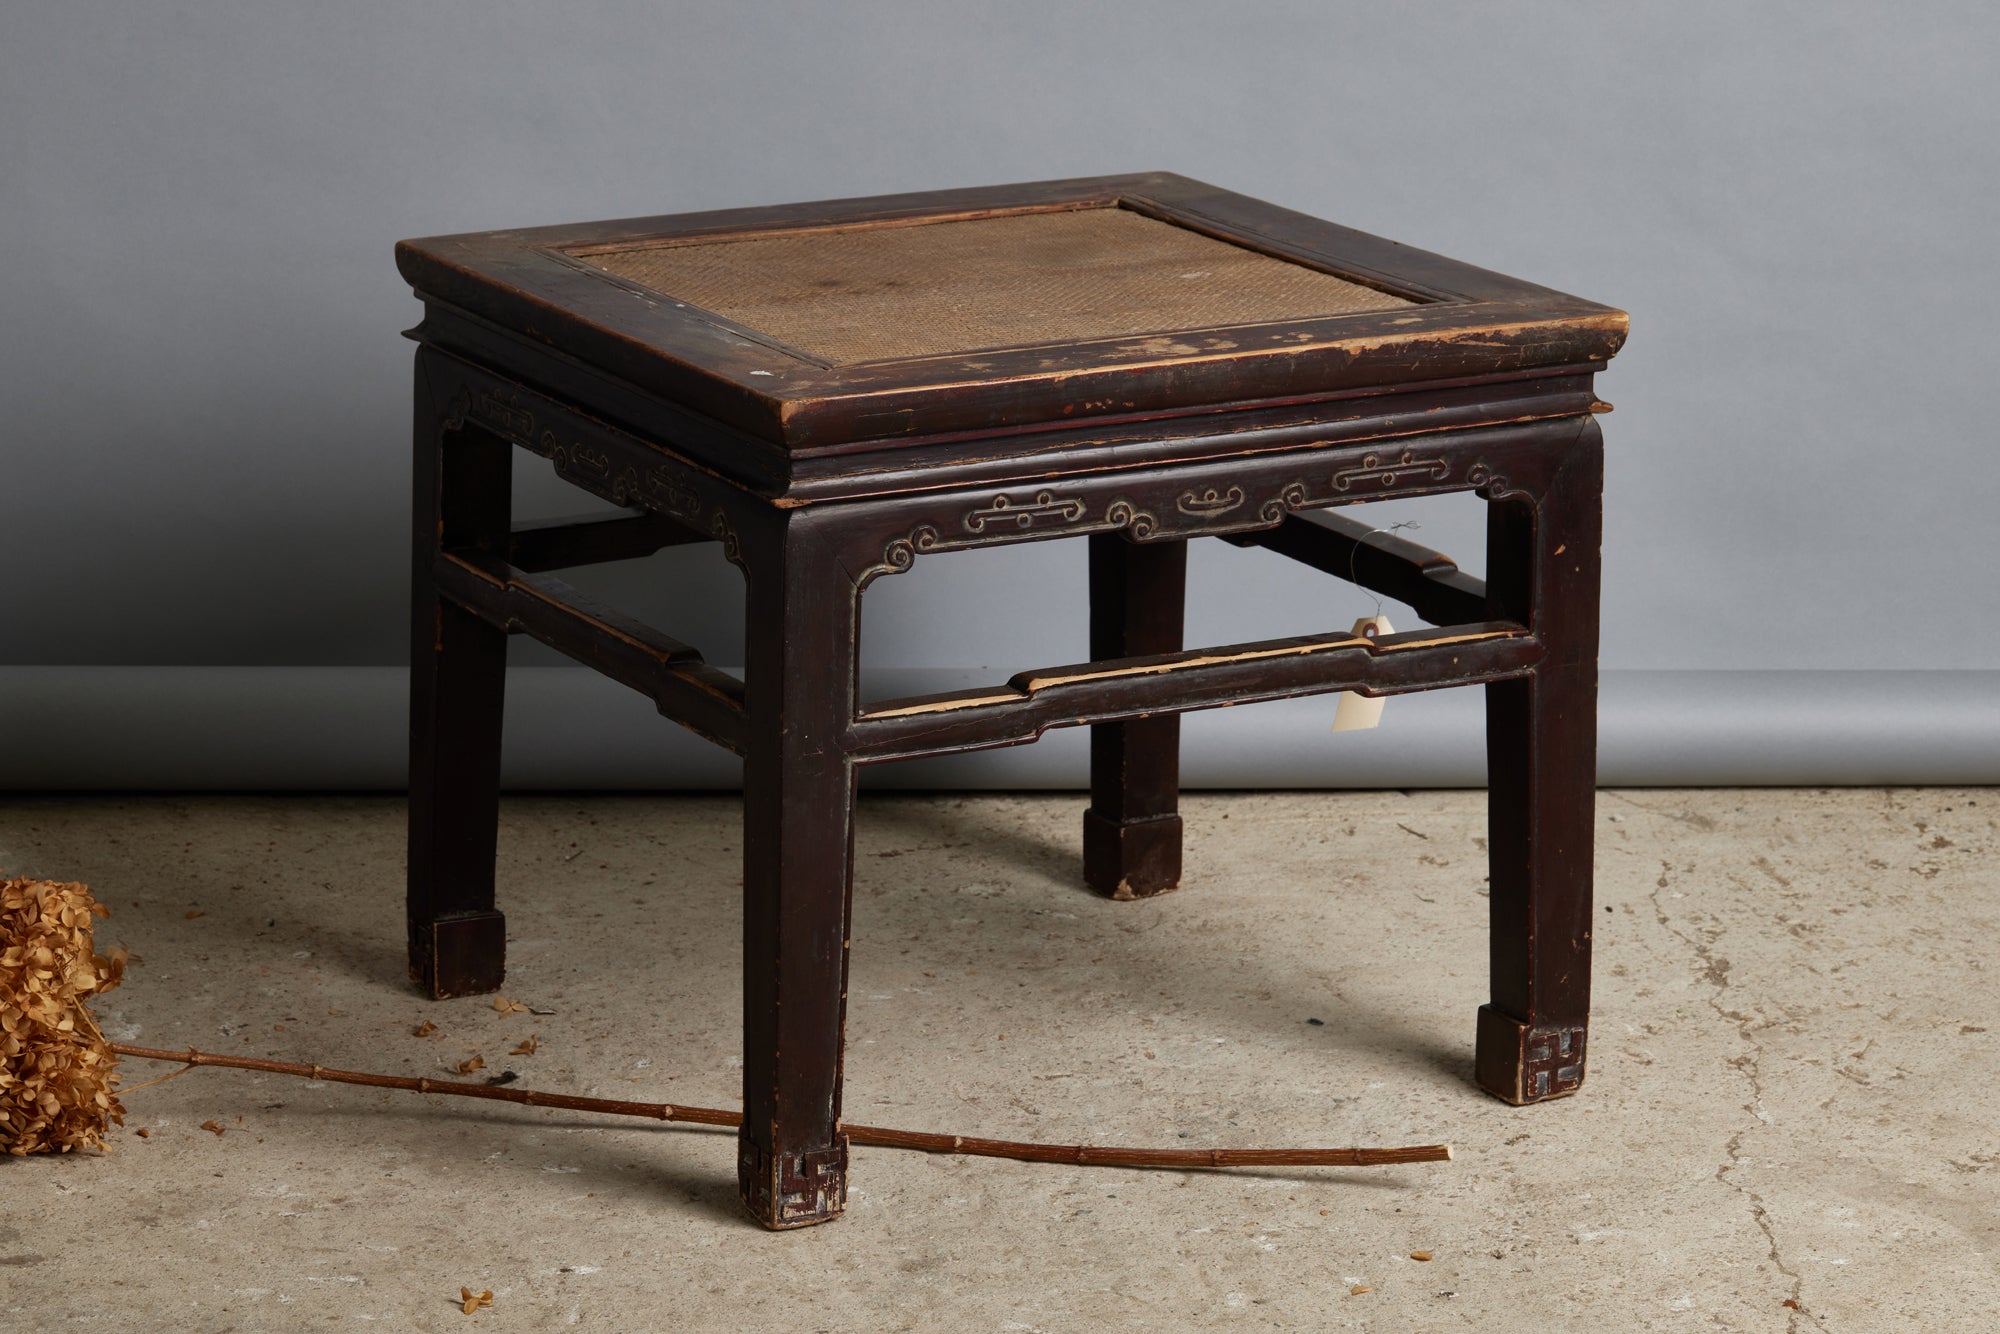 Late 17th - Early 18th Chinese Scholar Meditation Stool with Original Rattan Top